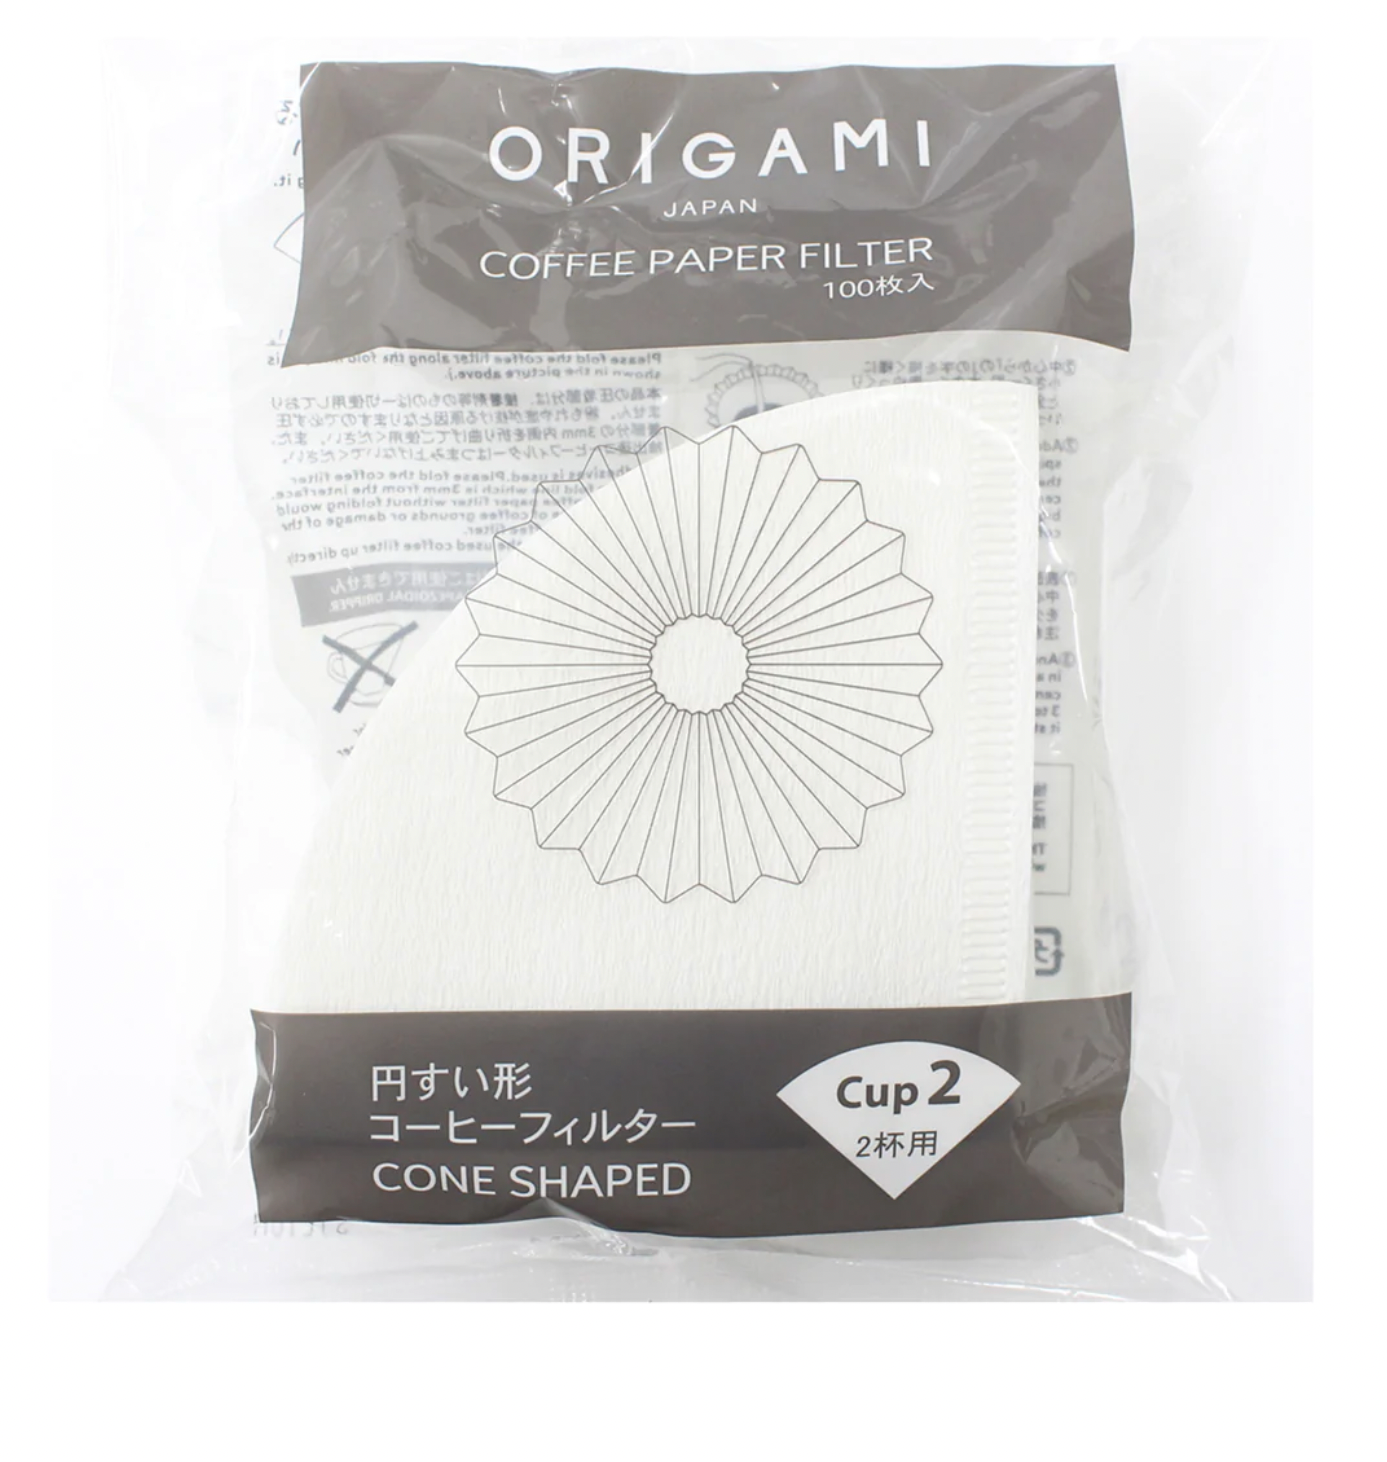 Origami Conical Paper Filter for small drippers